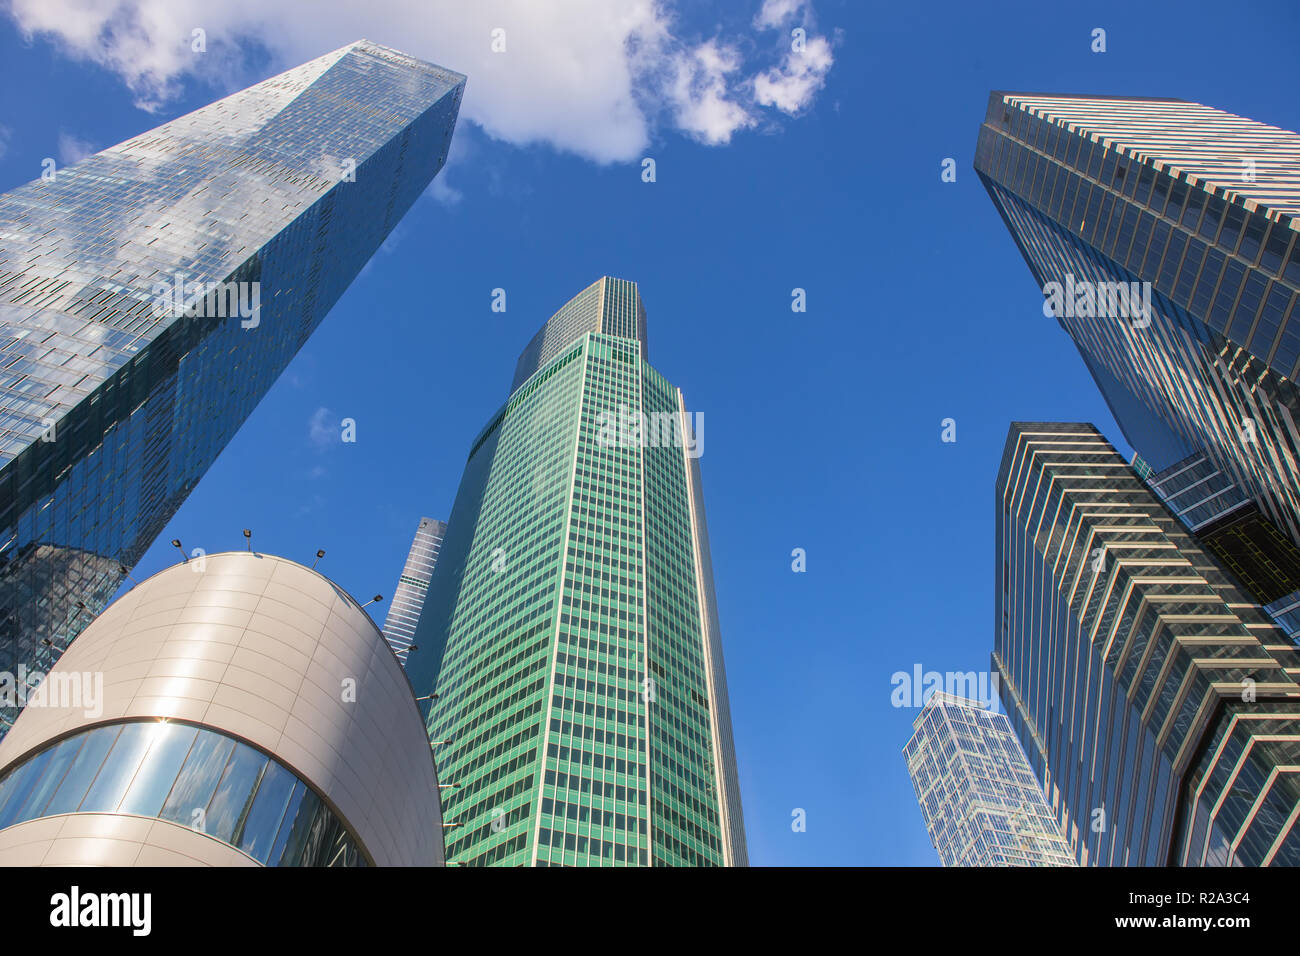 high buildings of modern business center Stock Photo